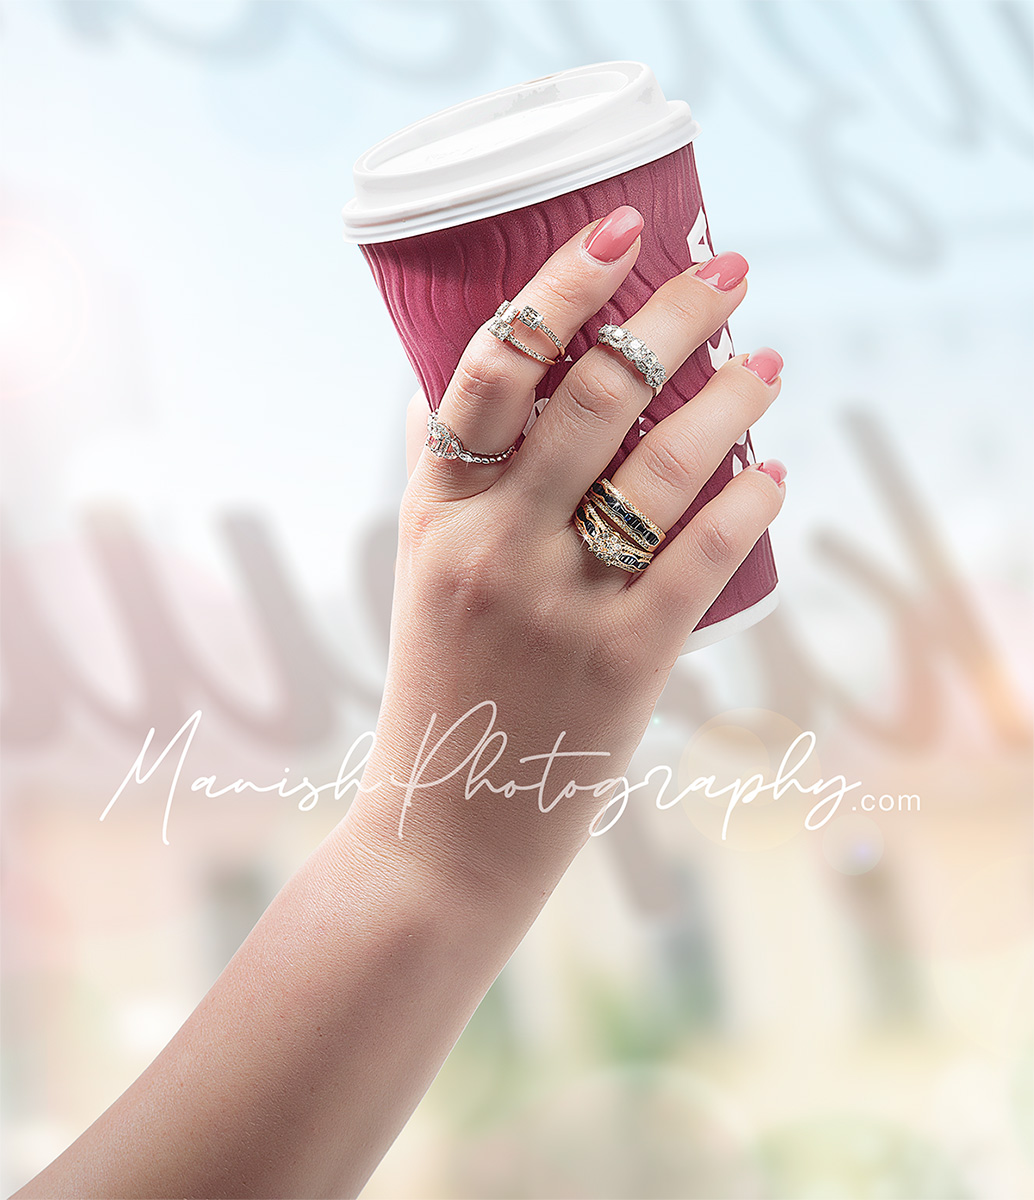 Jewellery studded hand holding a coffee cup